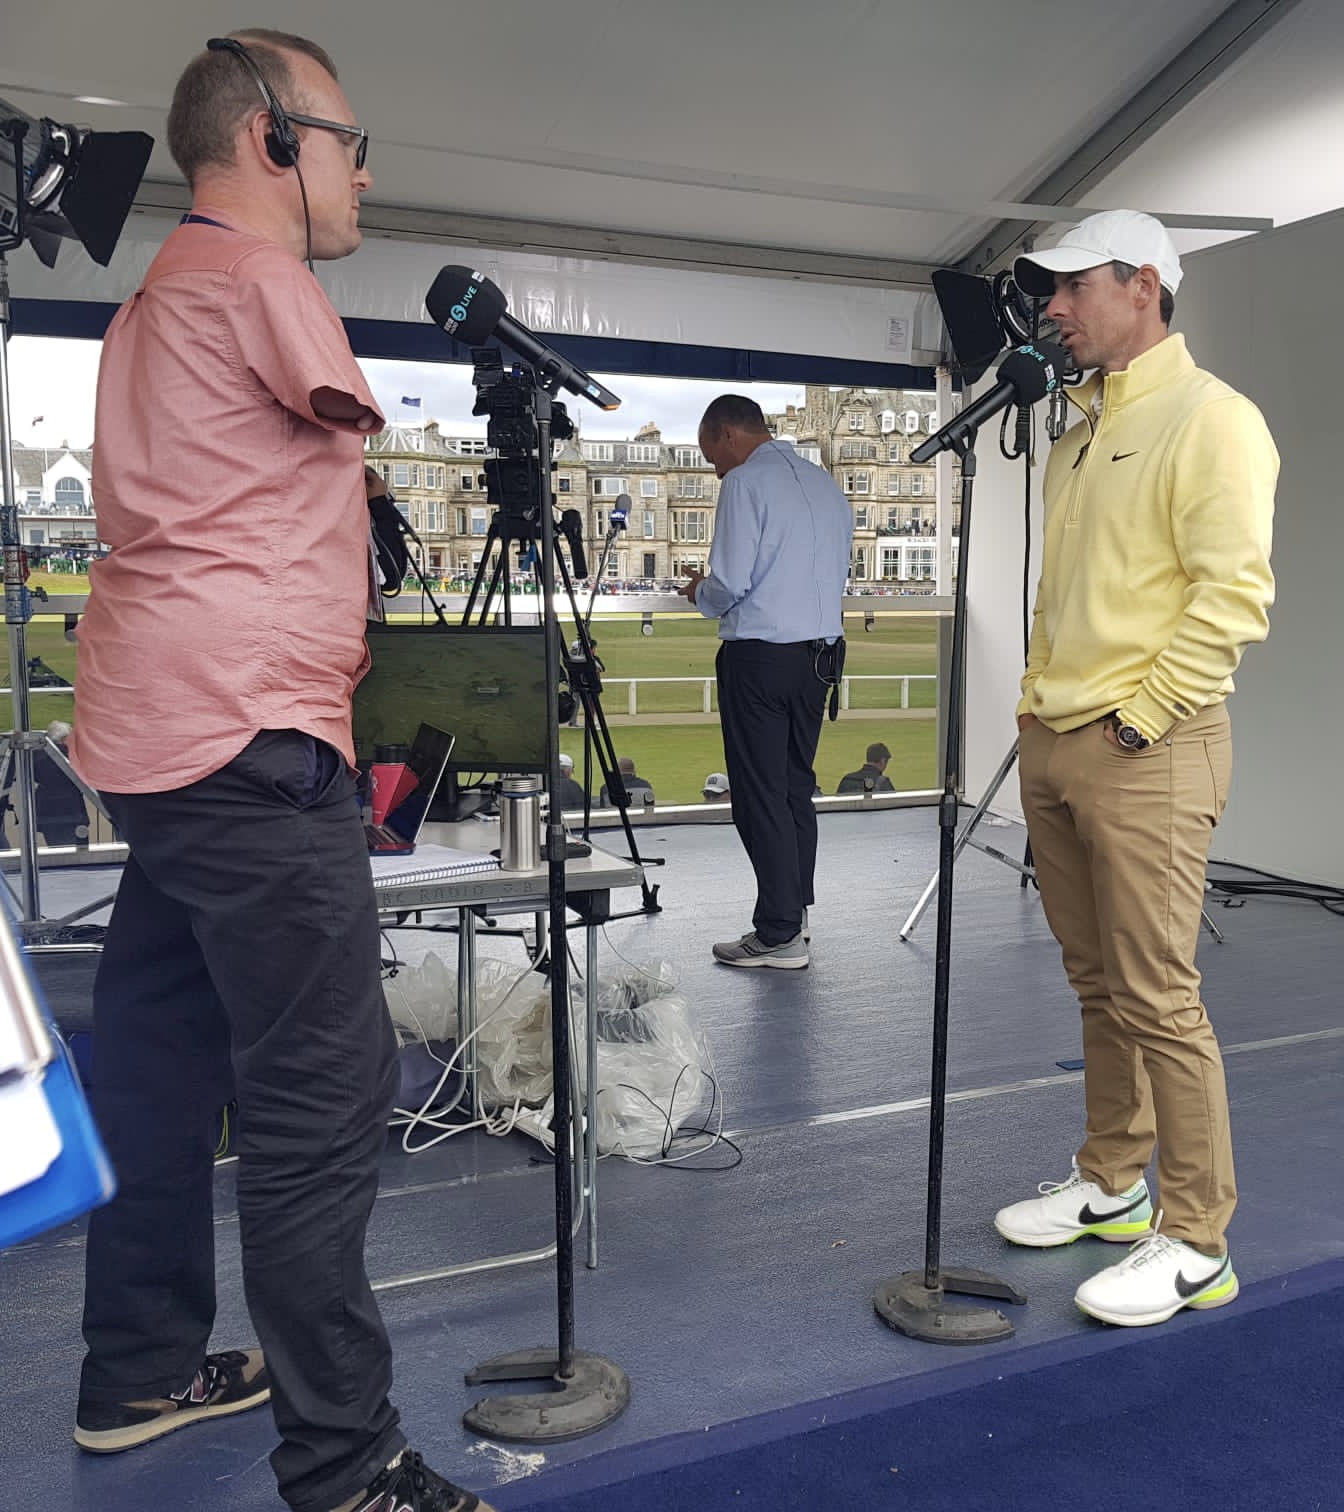 Andy standing on the left hand side of the photo interviewing Rory McIlroy on the right with the 1st tee and 18th green of St Andrews in the background